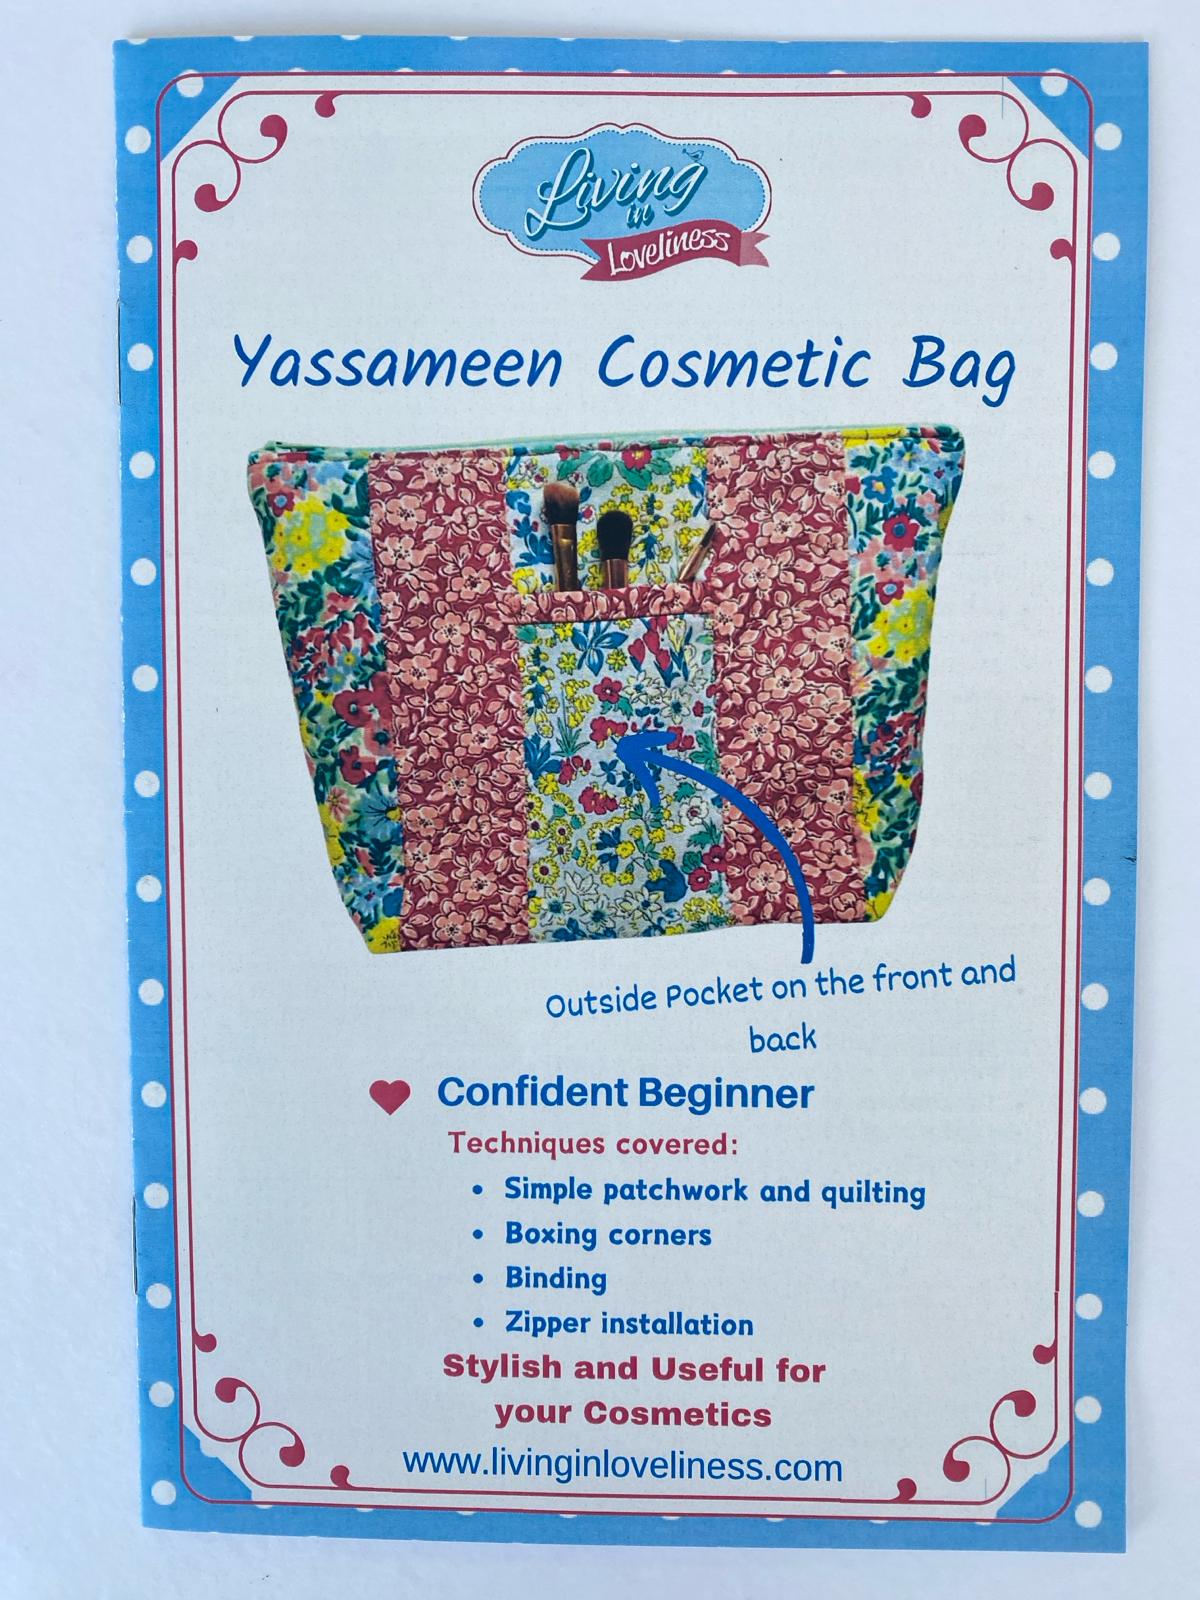 Living in Loveliness - Yassameen Cosmetic Bag